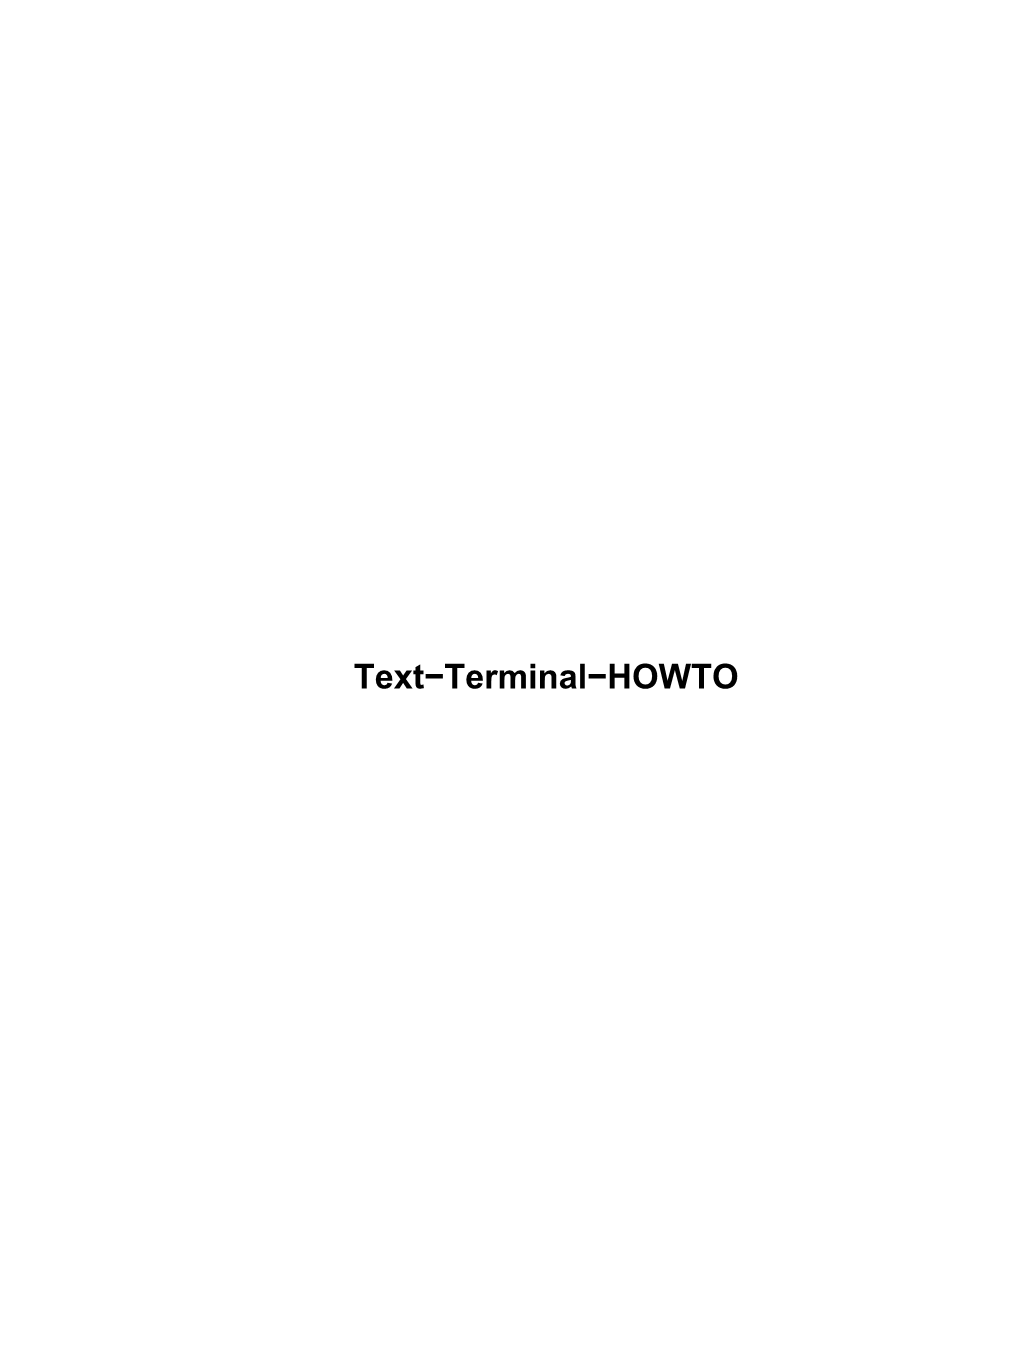 Text-Terminal-HOWTO